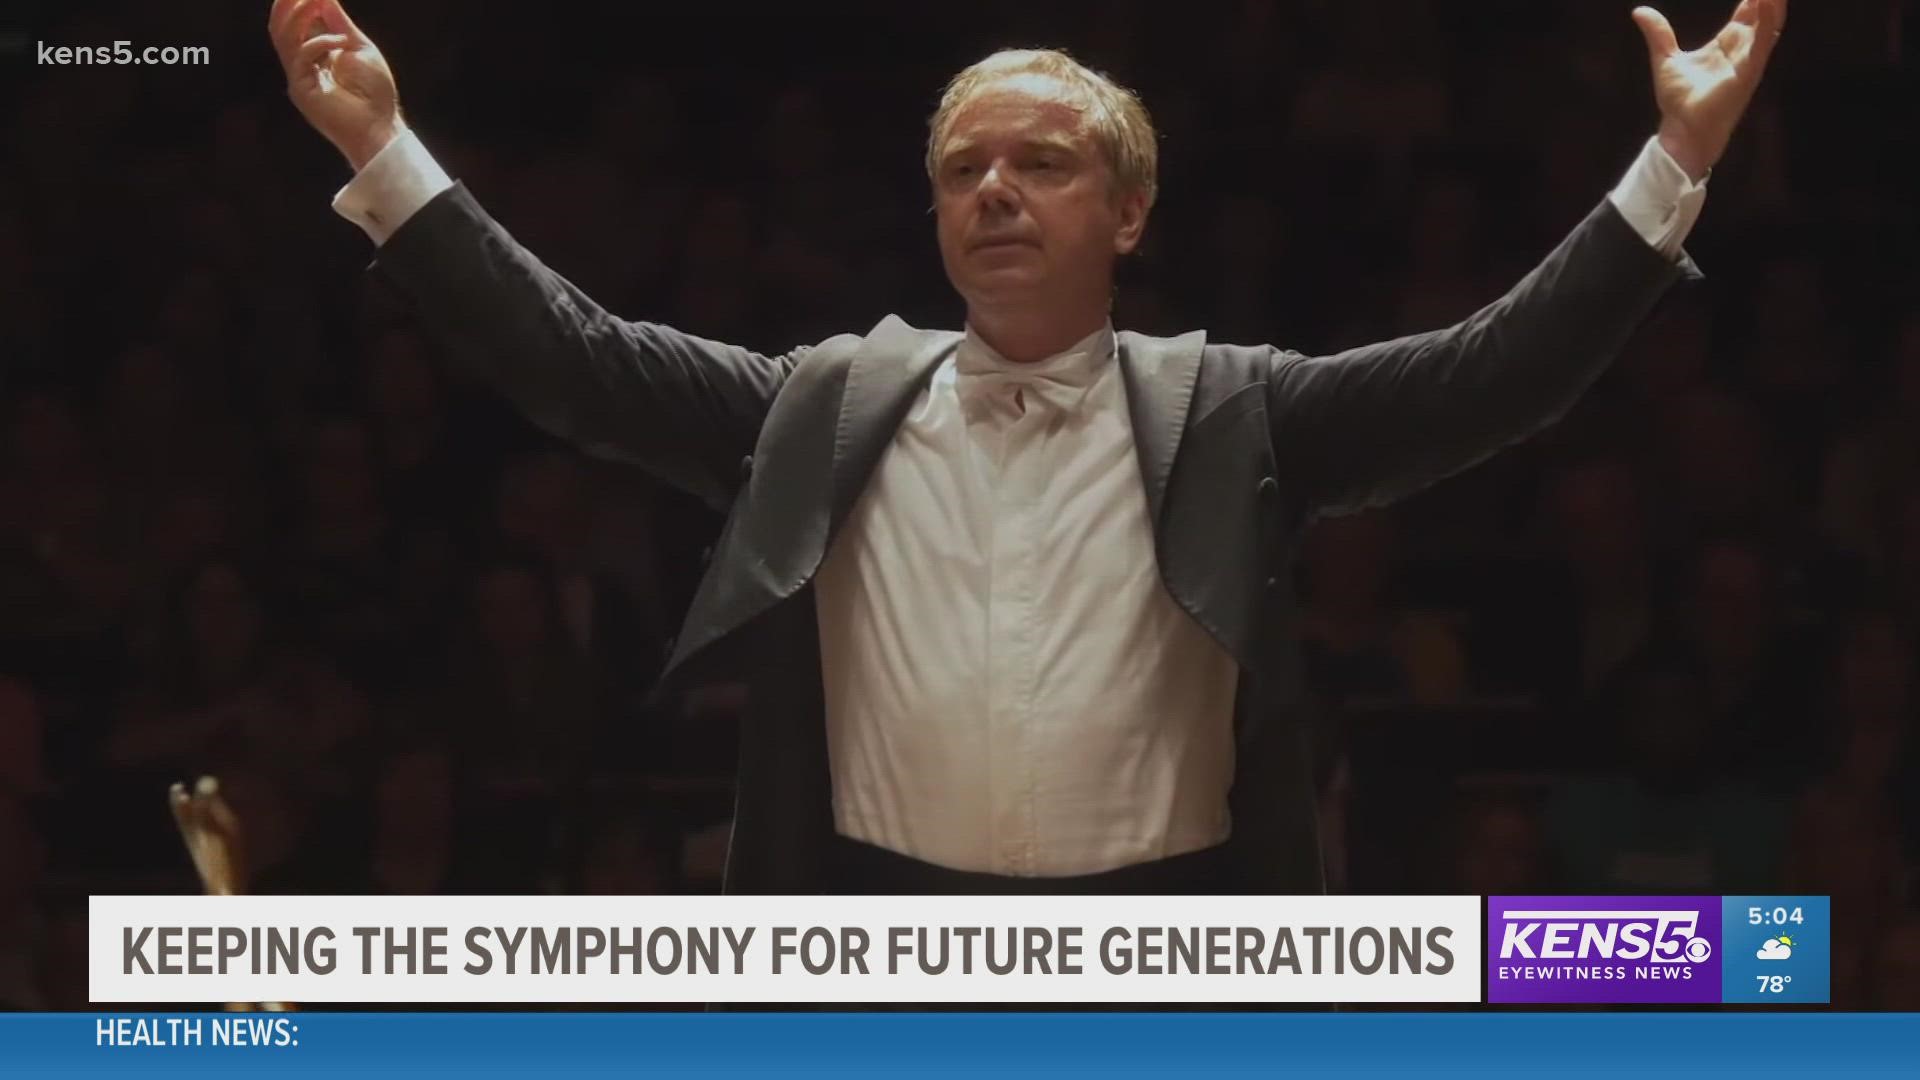 The San Antonio Symphony Society remains firm in their position on their current contract.